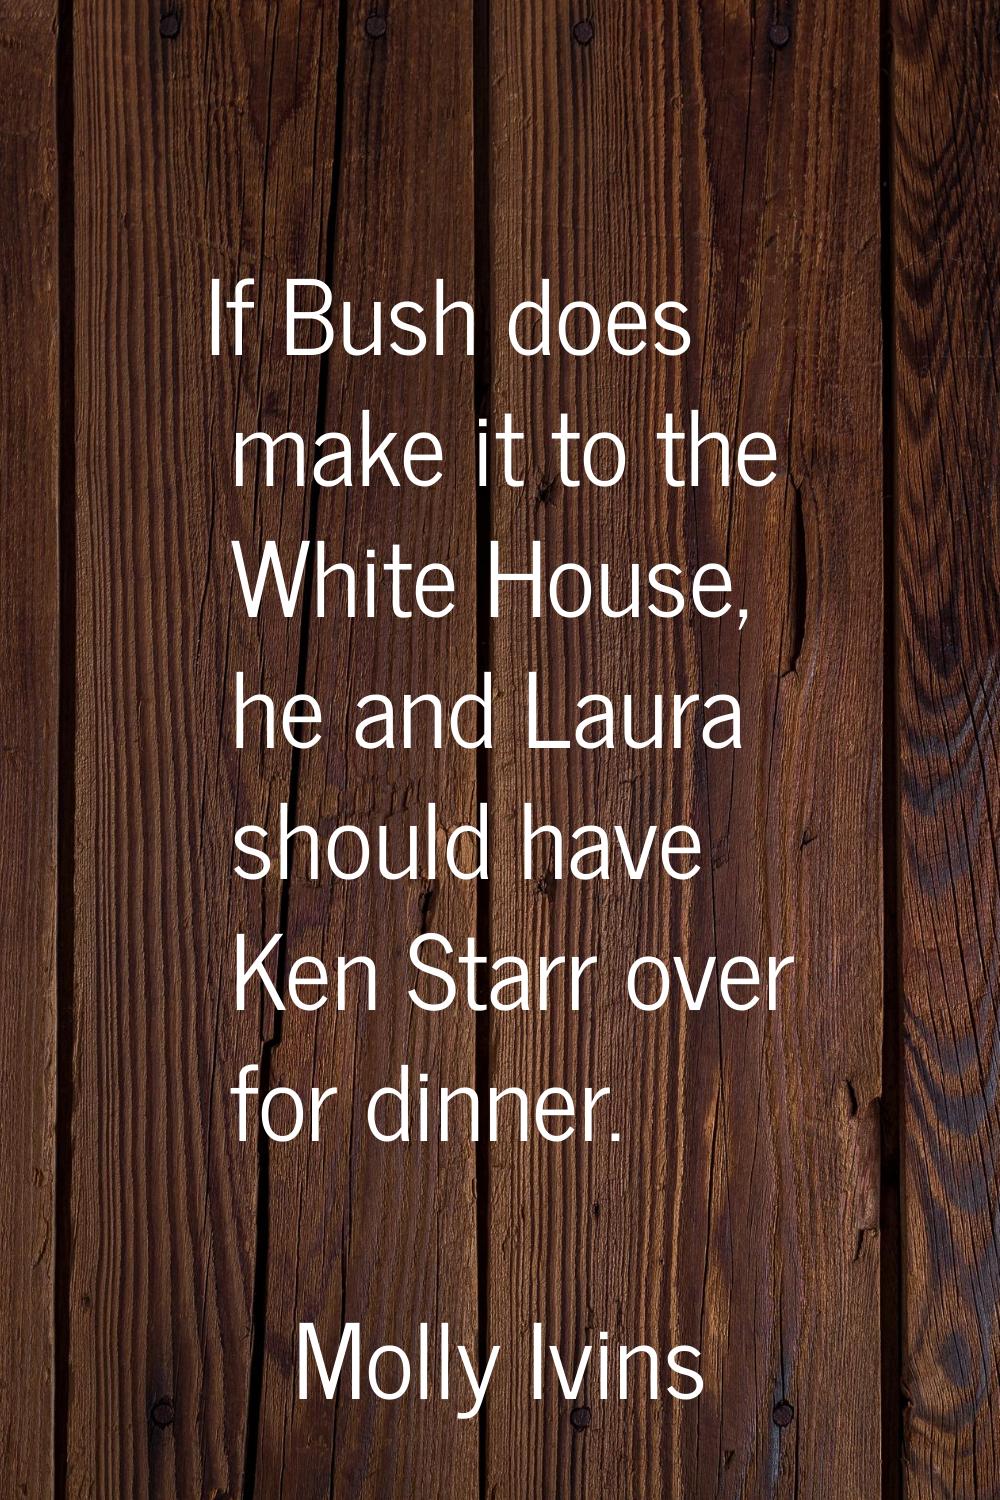 If Bush does make it to the White House, he and Laura should have Ken Starr over for dinner.